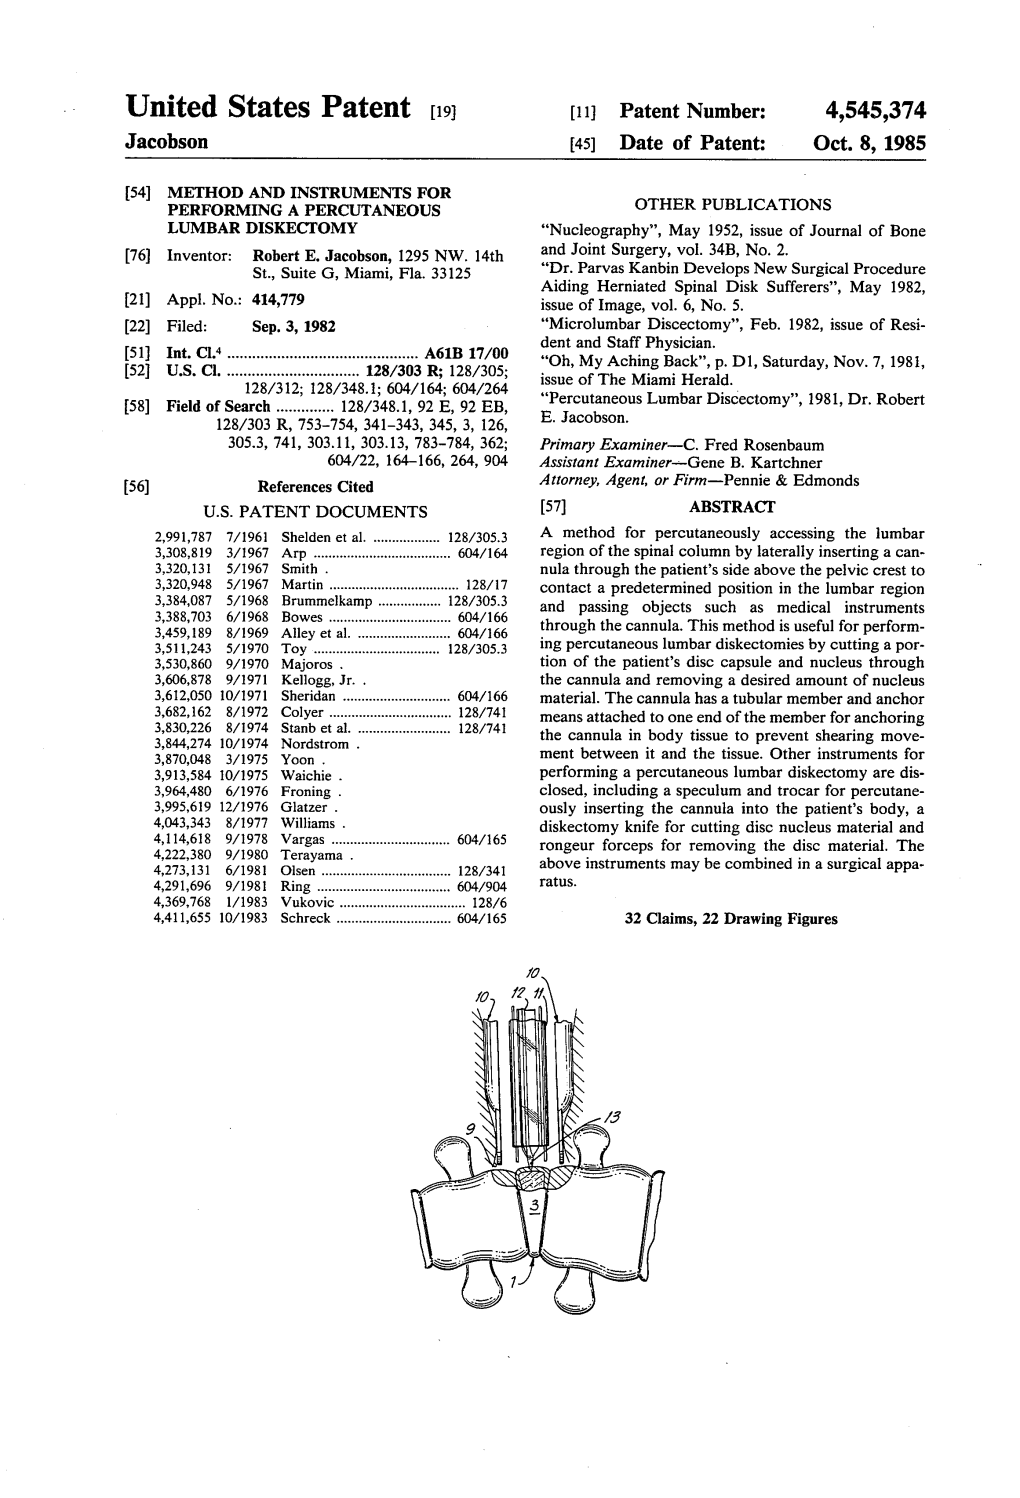 United States Patent (19) 11 Patent Number: 4,545,374 Jacobson 45 Date of Patent: Oct